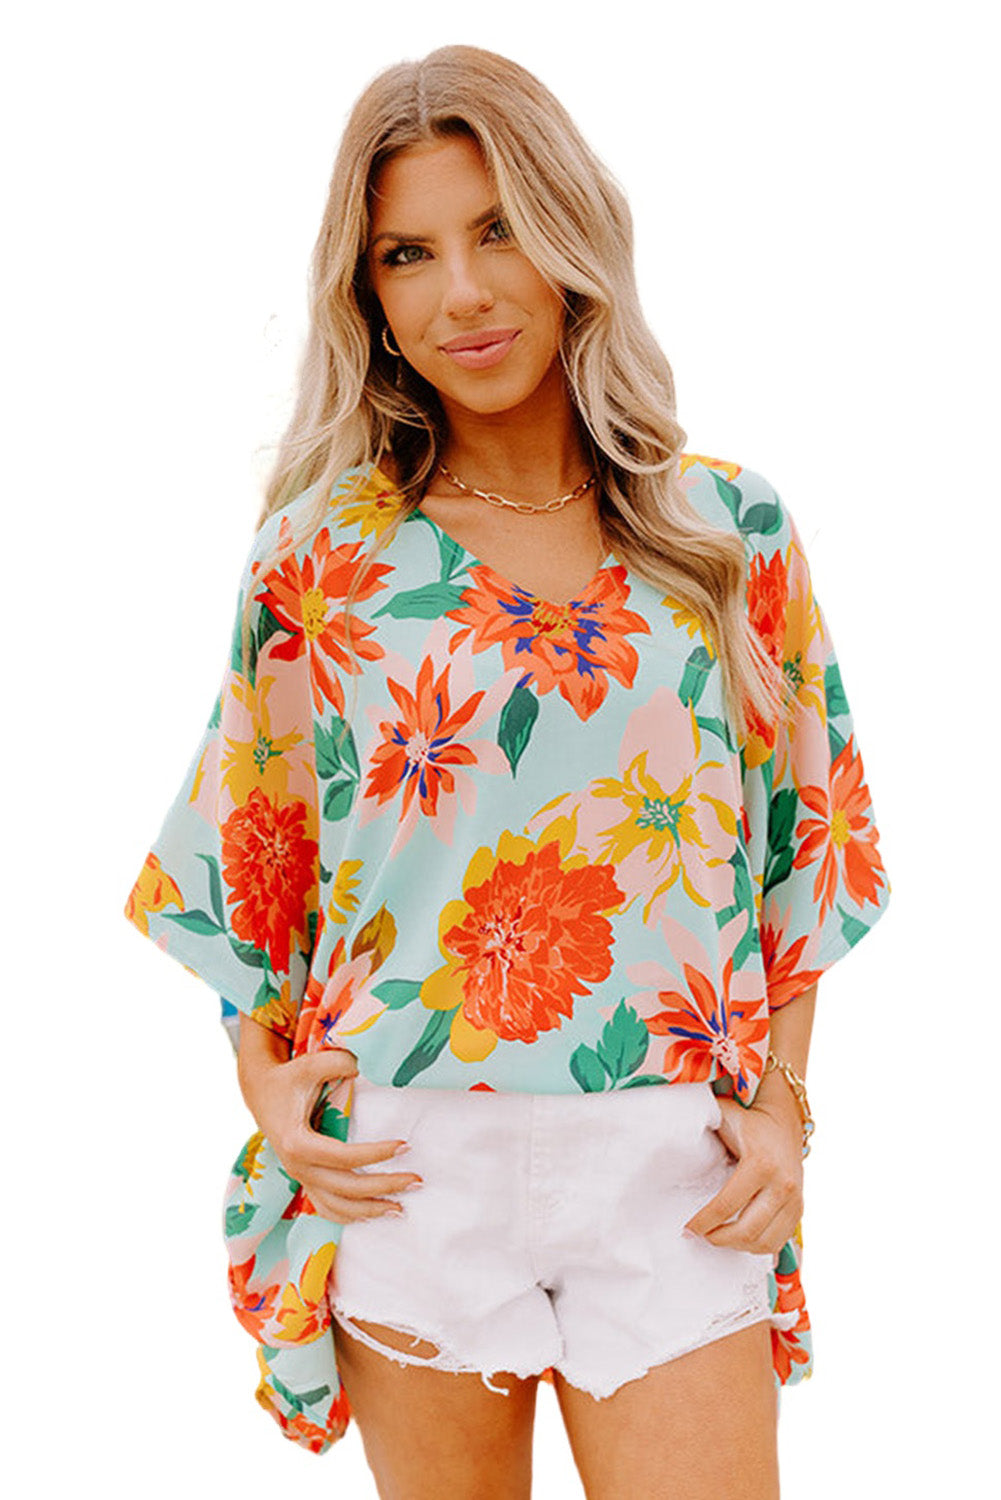 LC25121650-4-S, LC25121650-4-M, LC25121650-4-L, LC25121650-4-XL, Sky Blue Floral Print Loose Half Sleeve V Neck T Shirt